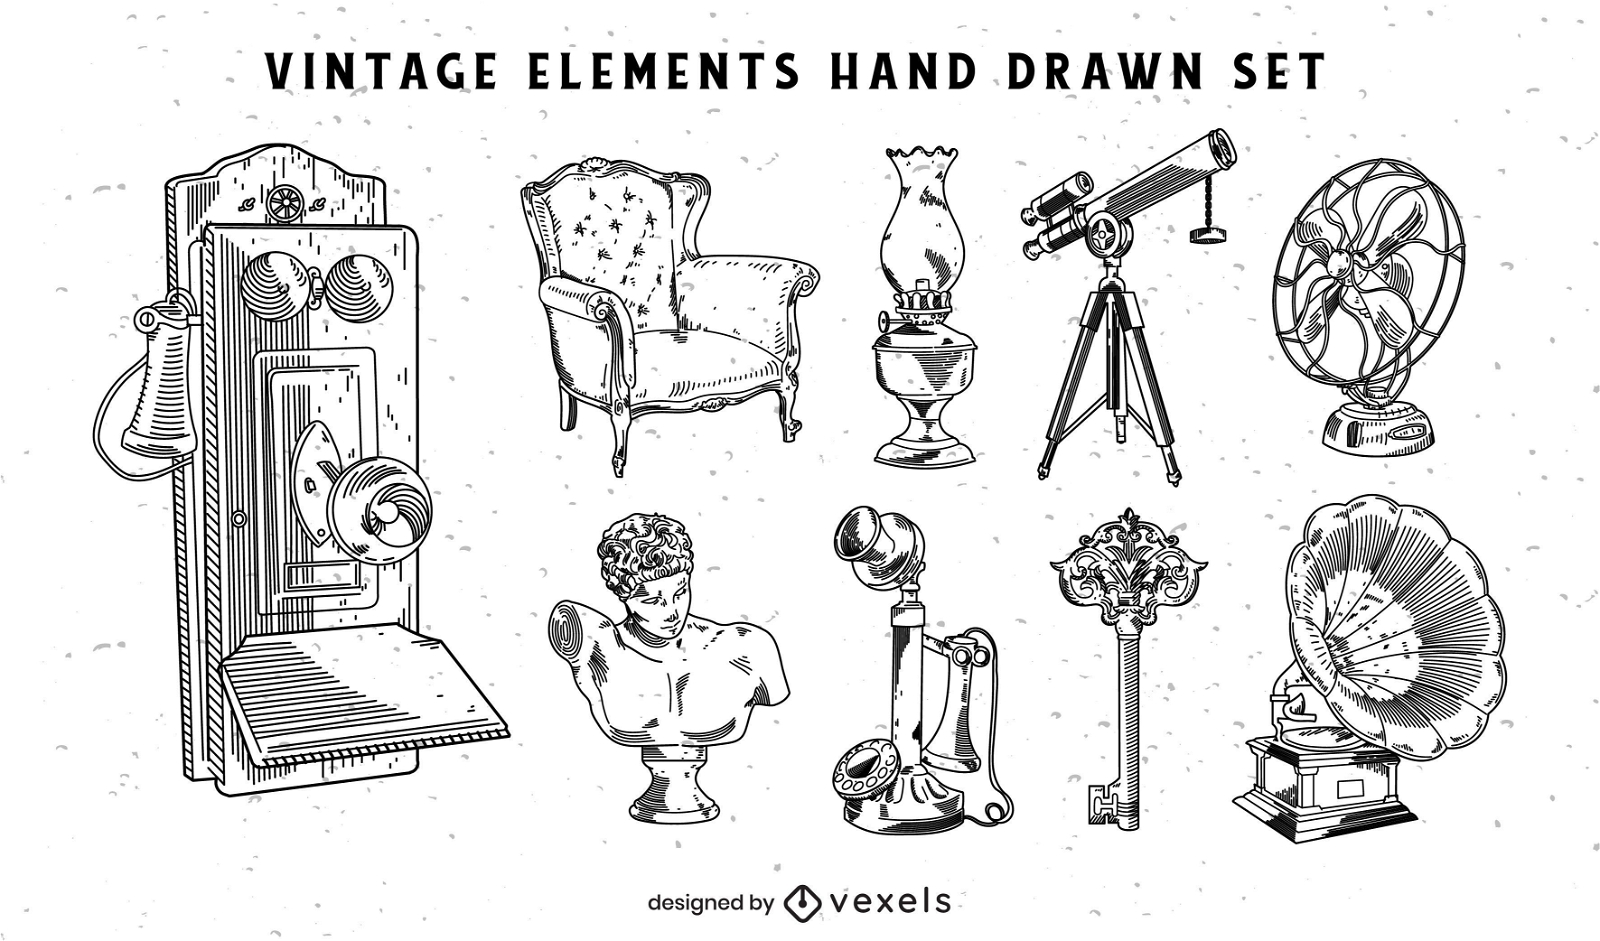 Suitcases and bags icon set hand drawn in vintage Vector Image